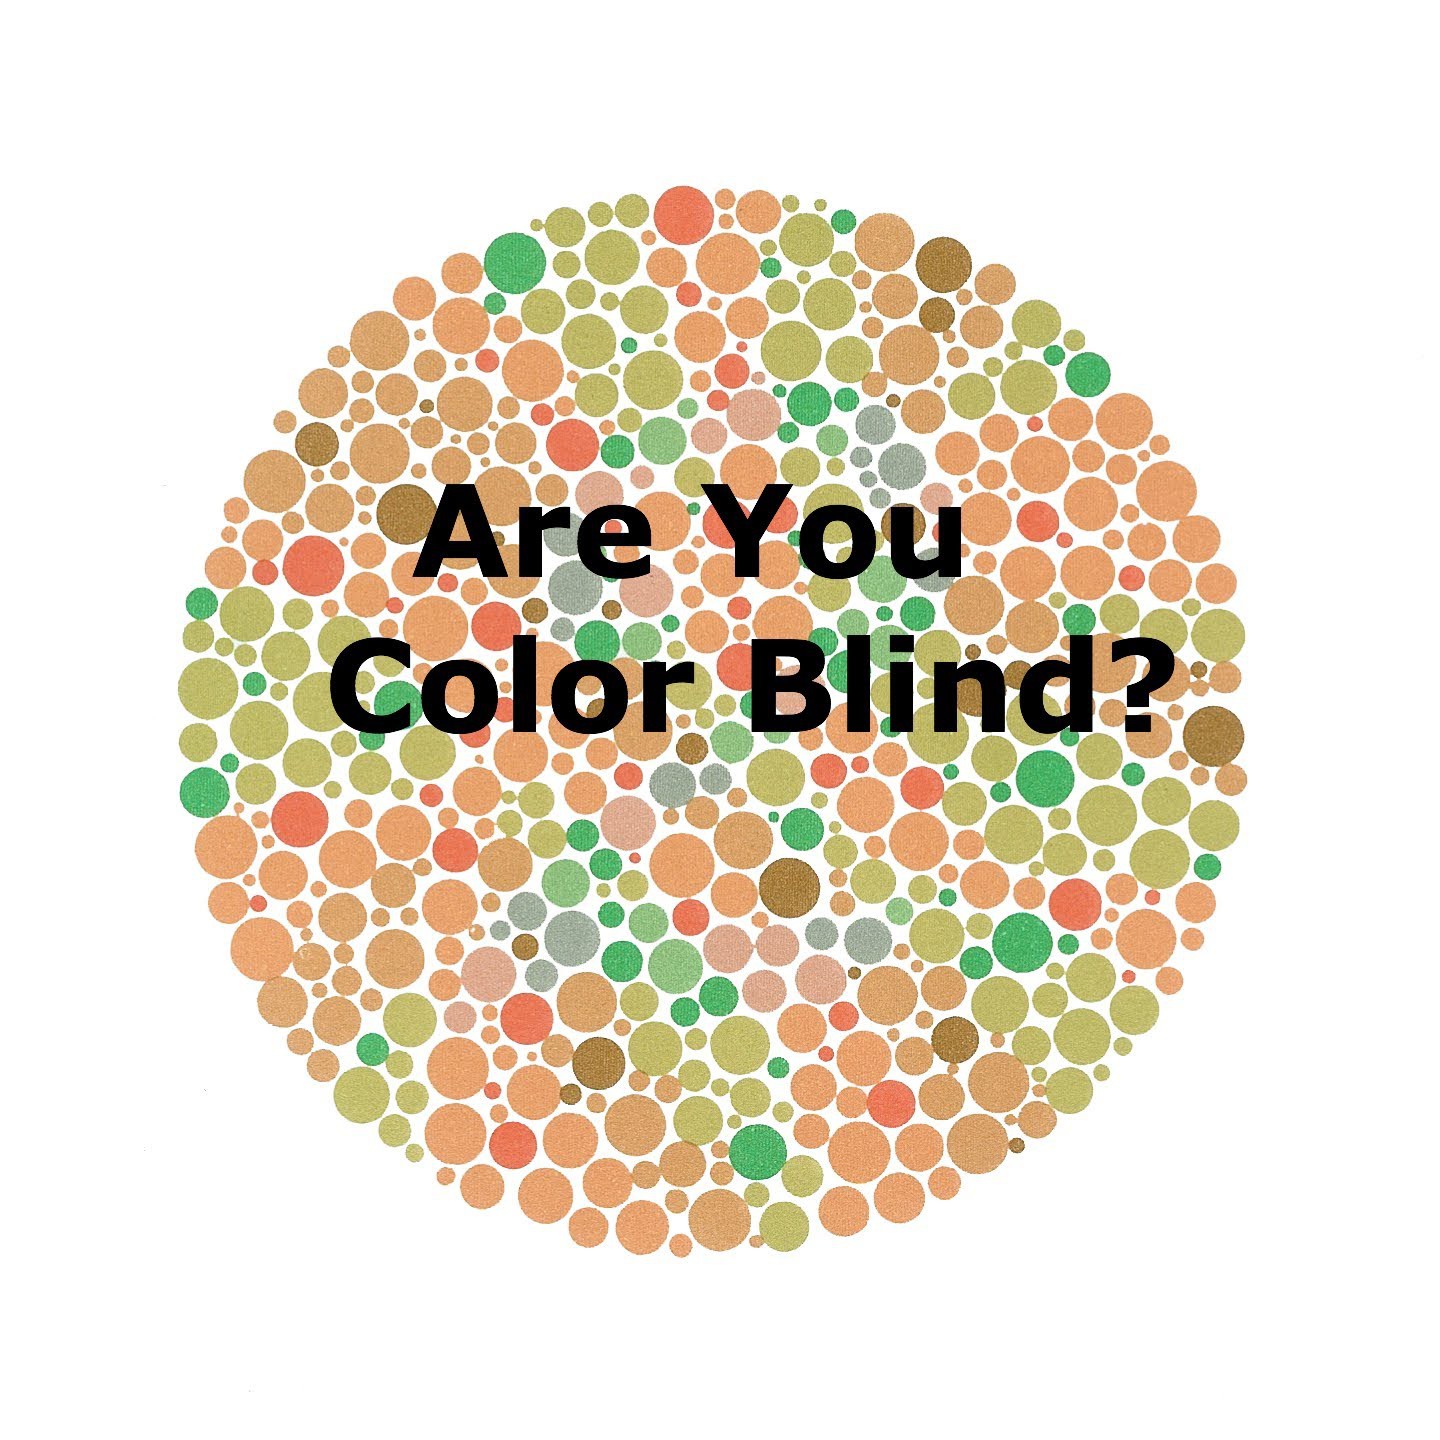 10 To Test The Color Blind